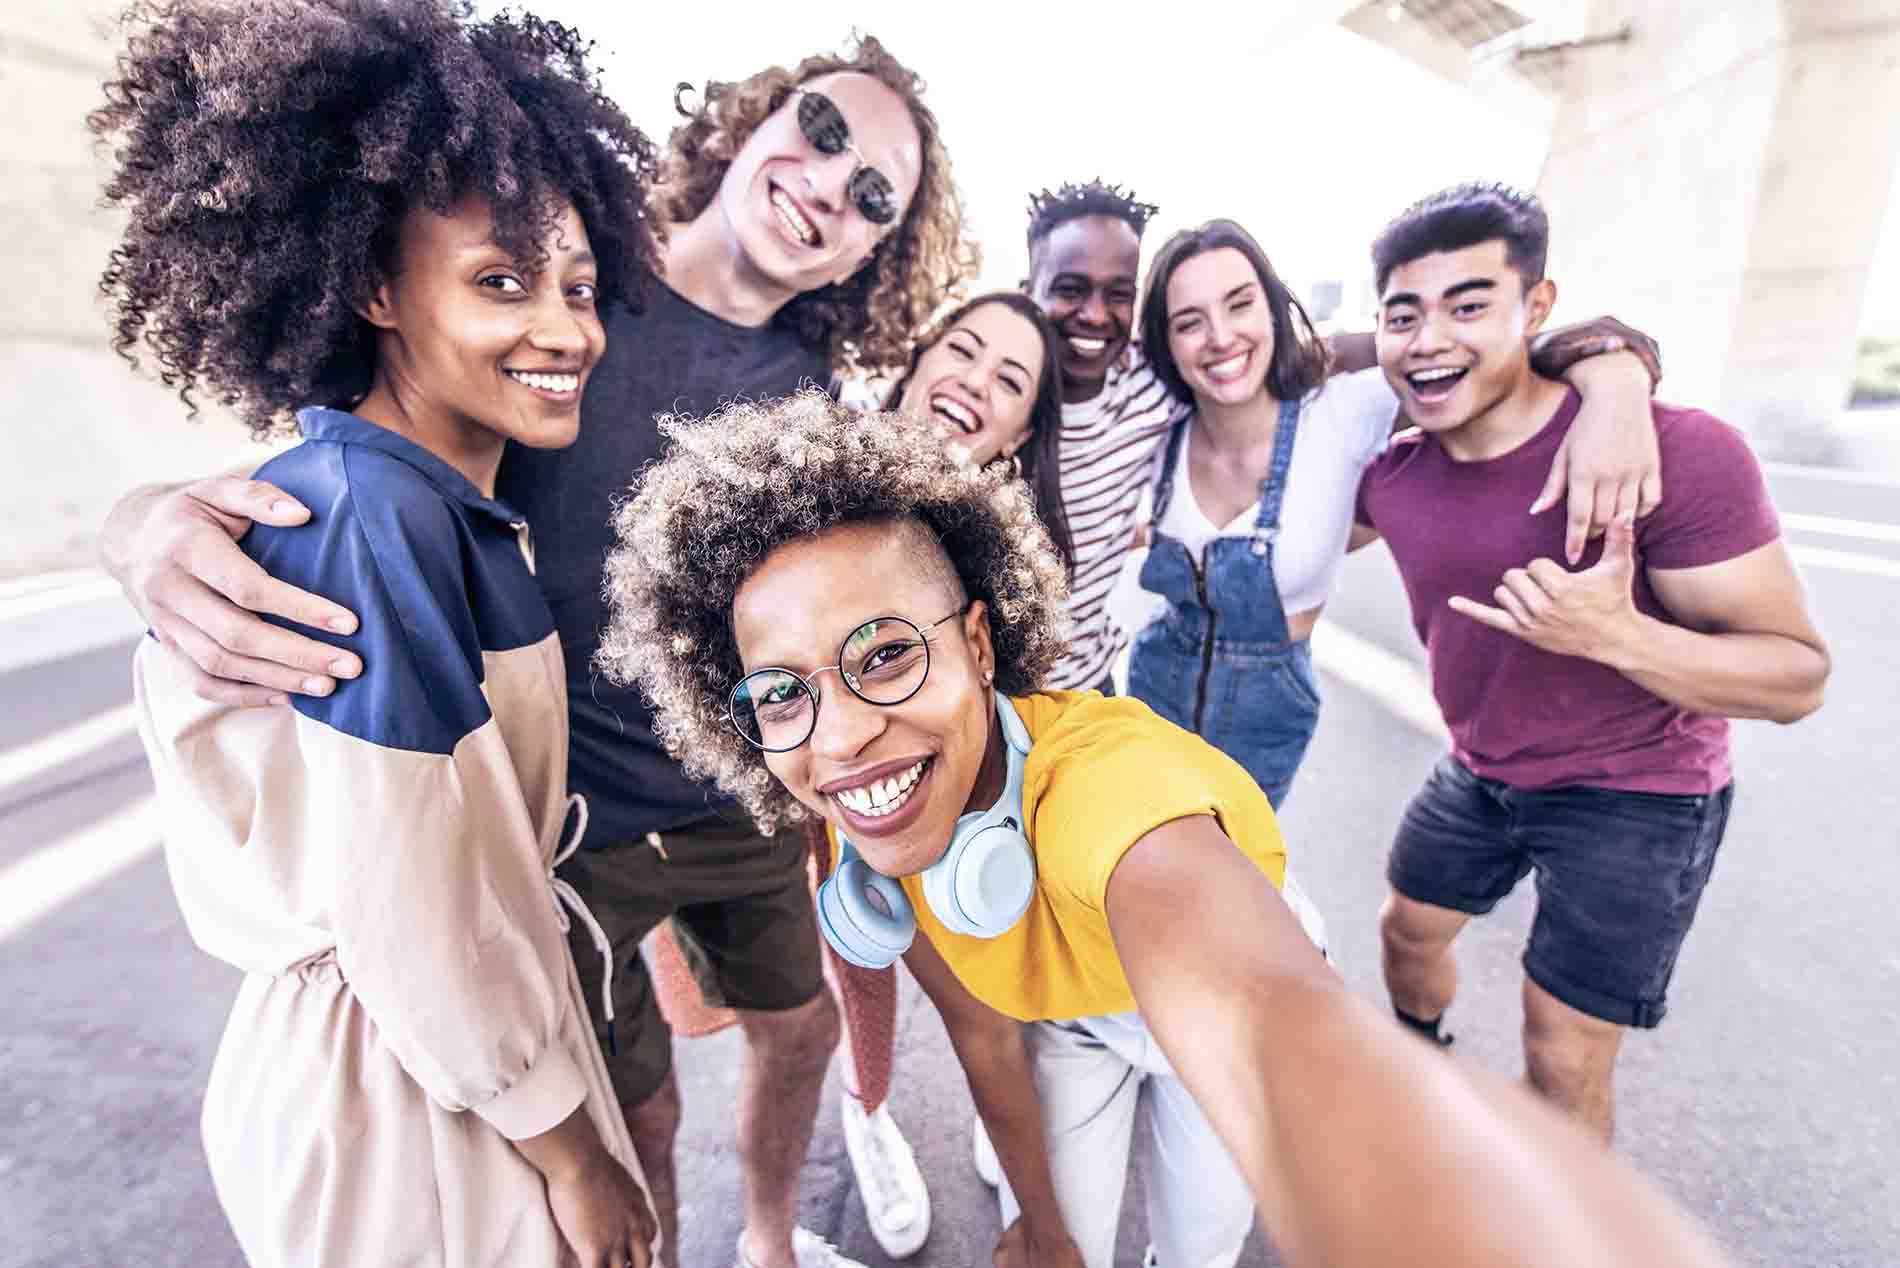 Multiracial friends taking selfie photo with smart mobile phone outside - Group of young people smiling together at camera - Friendship concept with guys and girls having fun on city street